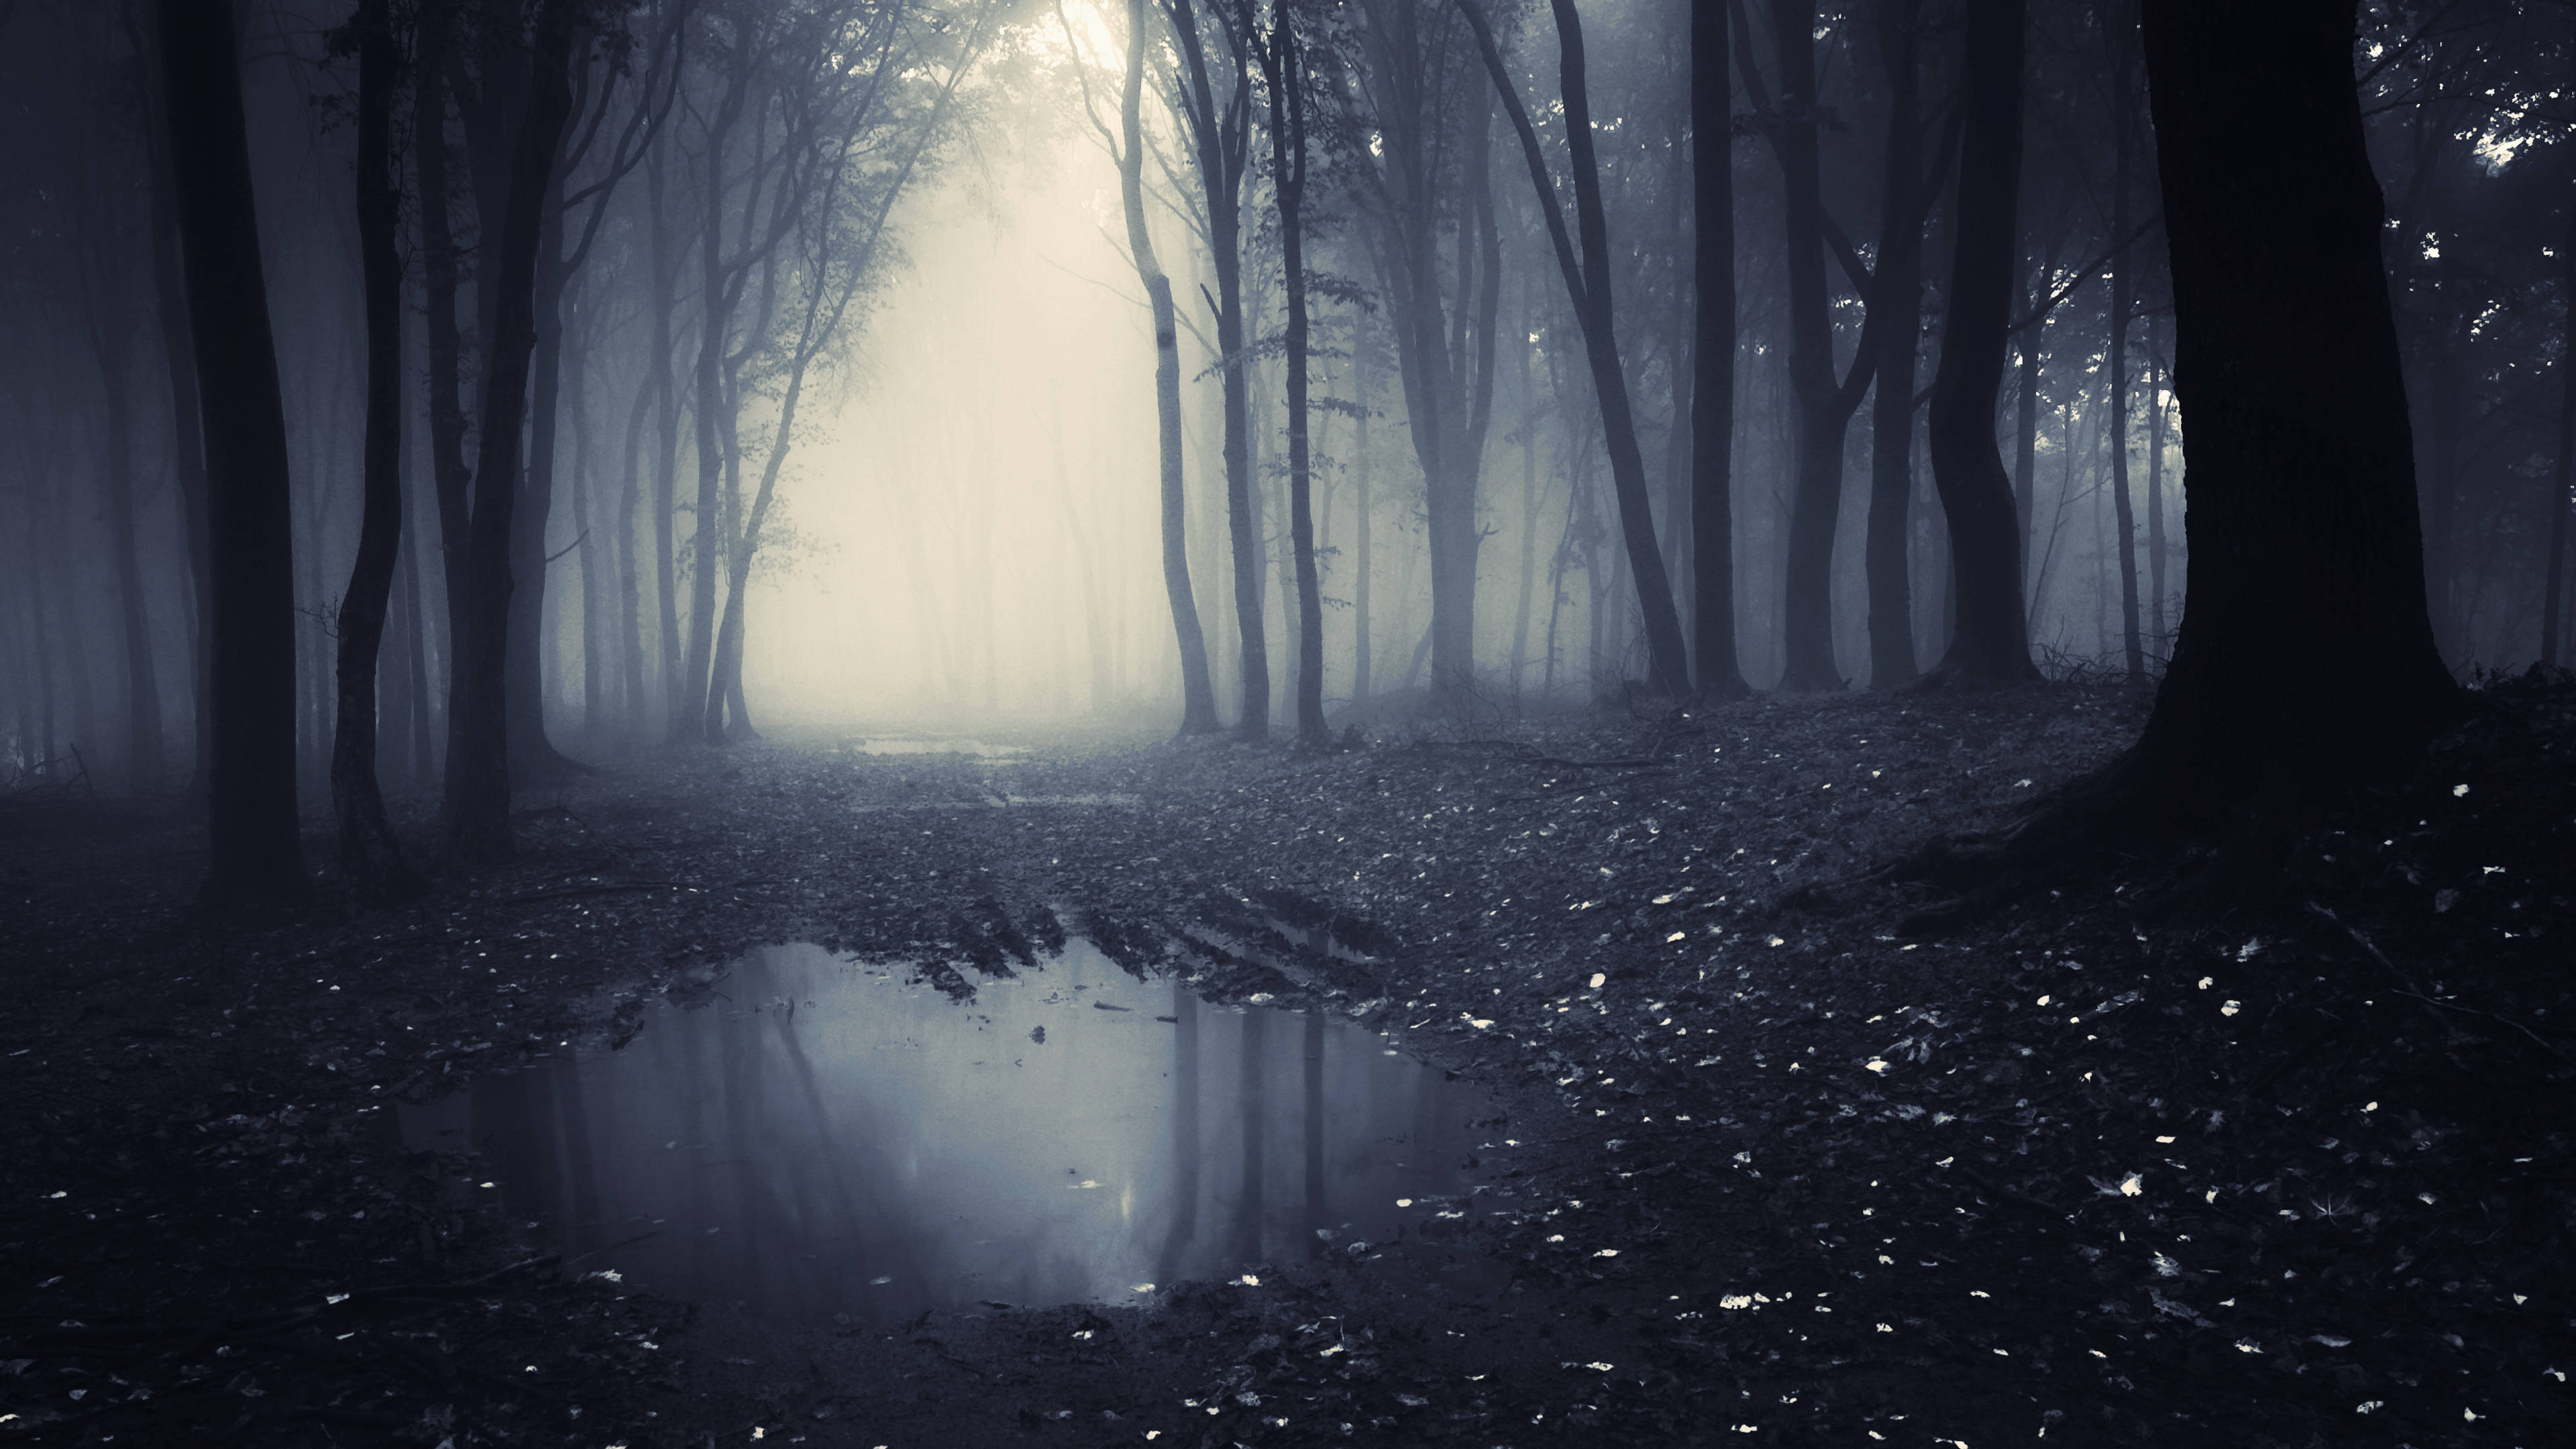 A spooky forest with fog and a puddle. - Foggy forest, forest